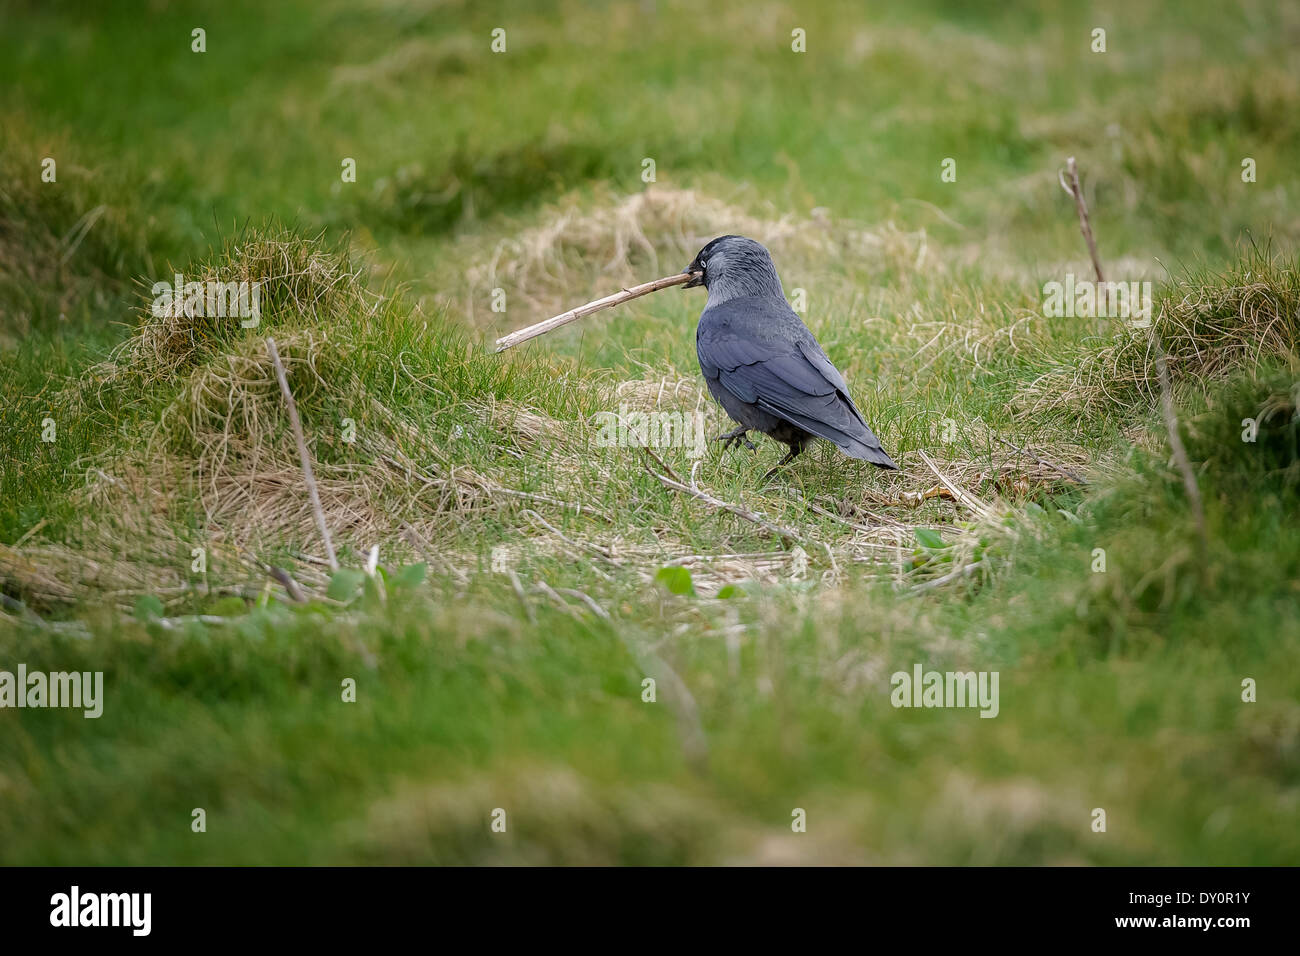 British birds - A jackdaw (Corvus monedula) gathers nesting material. Jackdaws prefer to nest in holes. Stock Photo